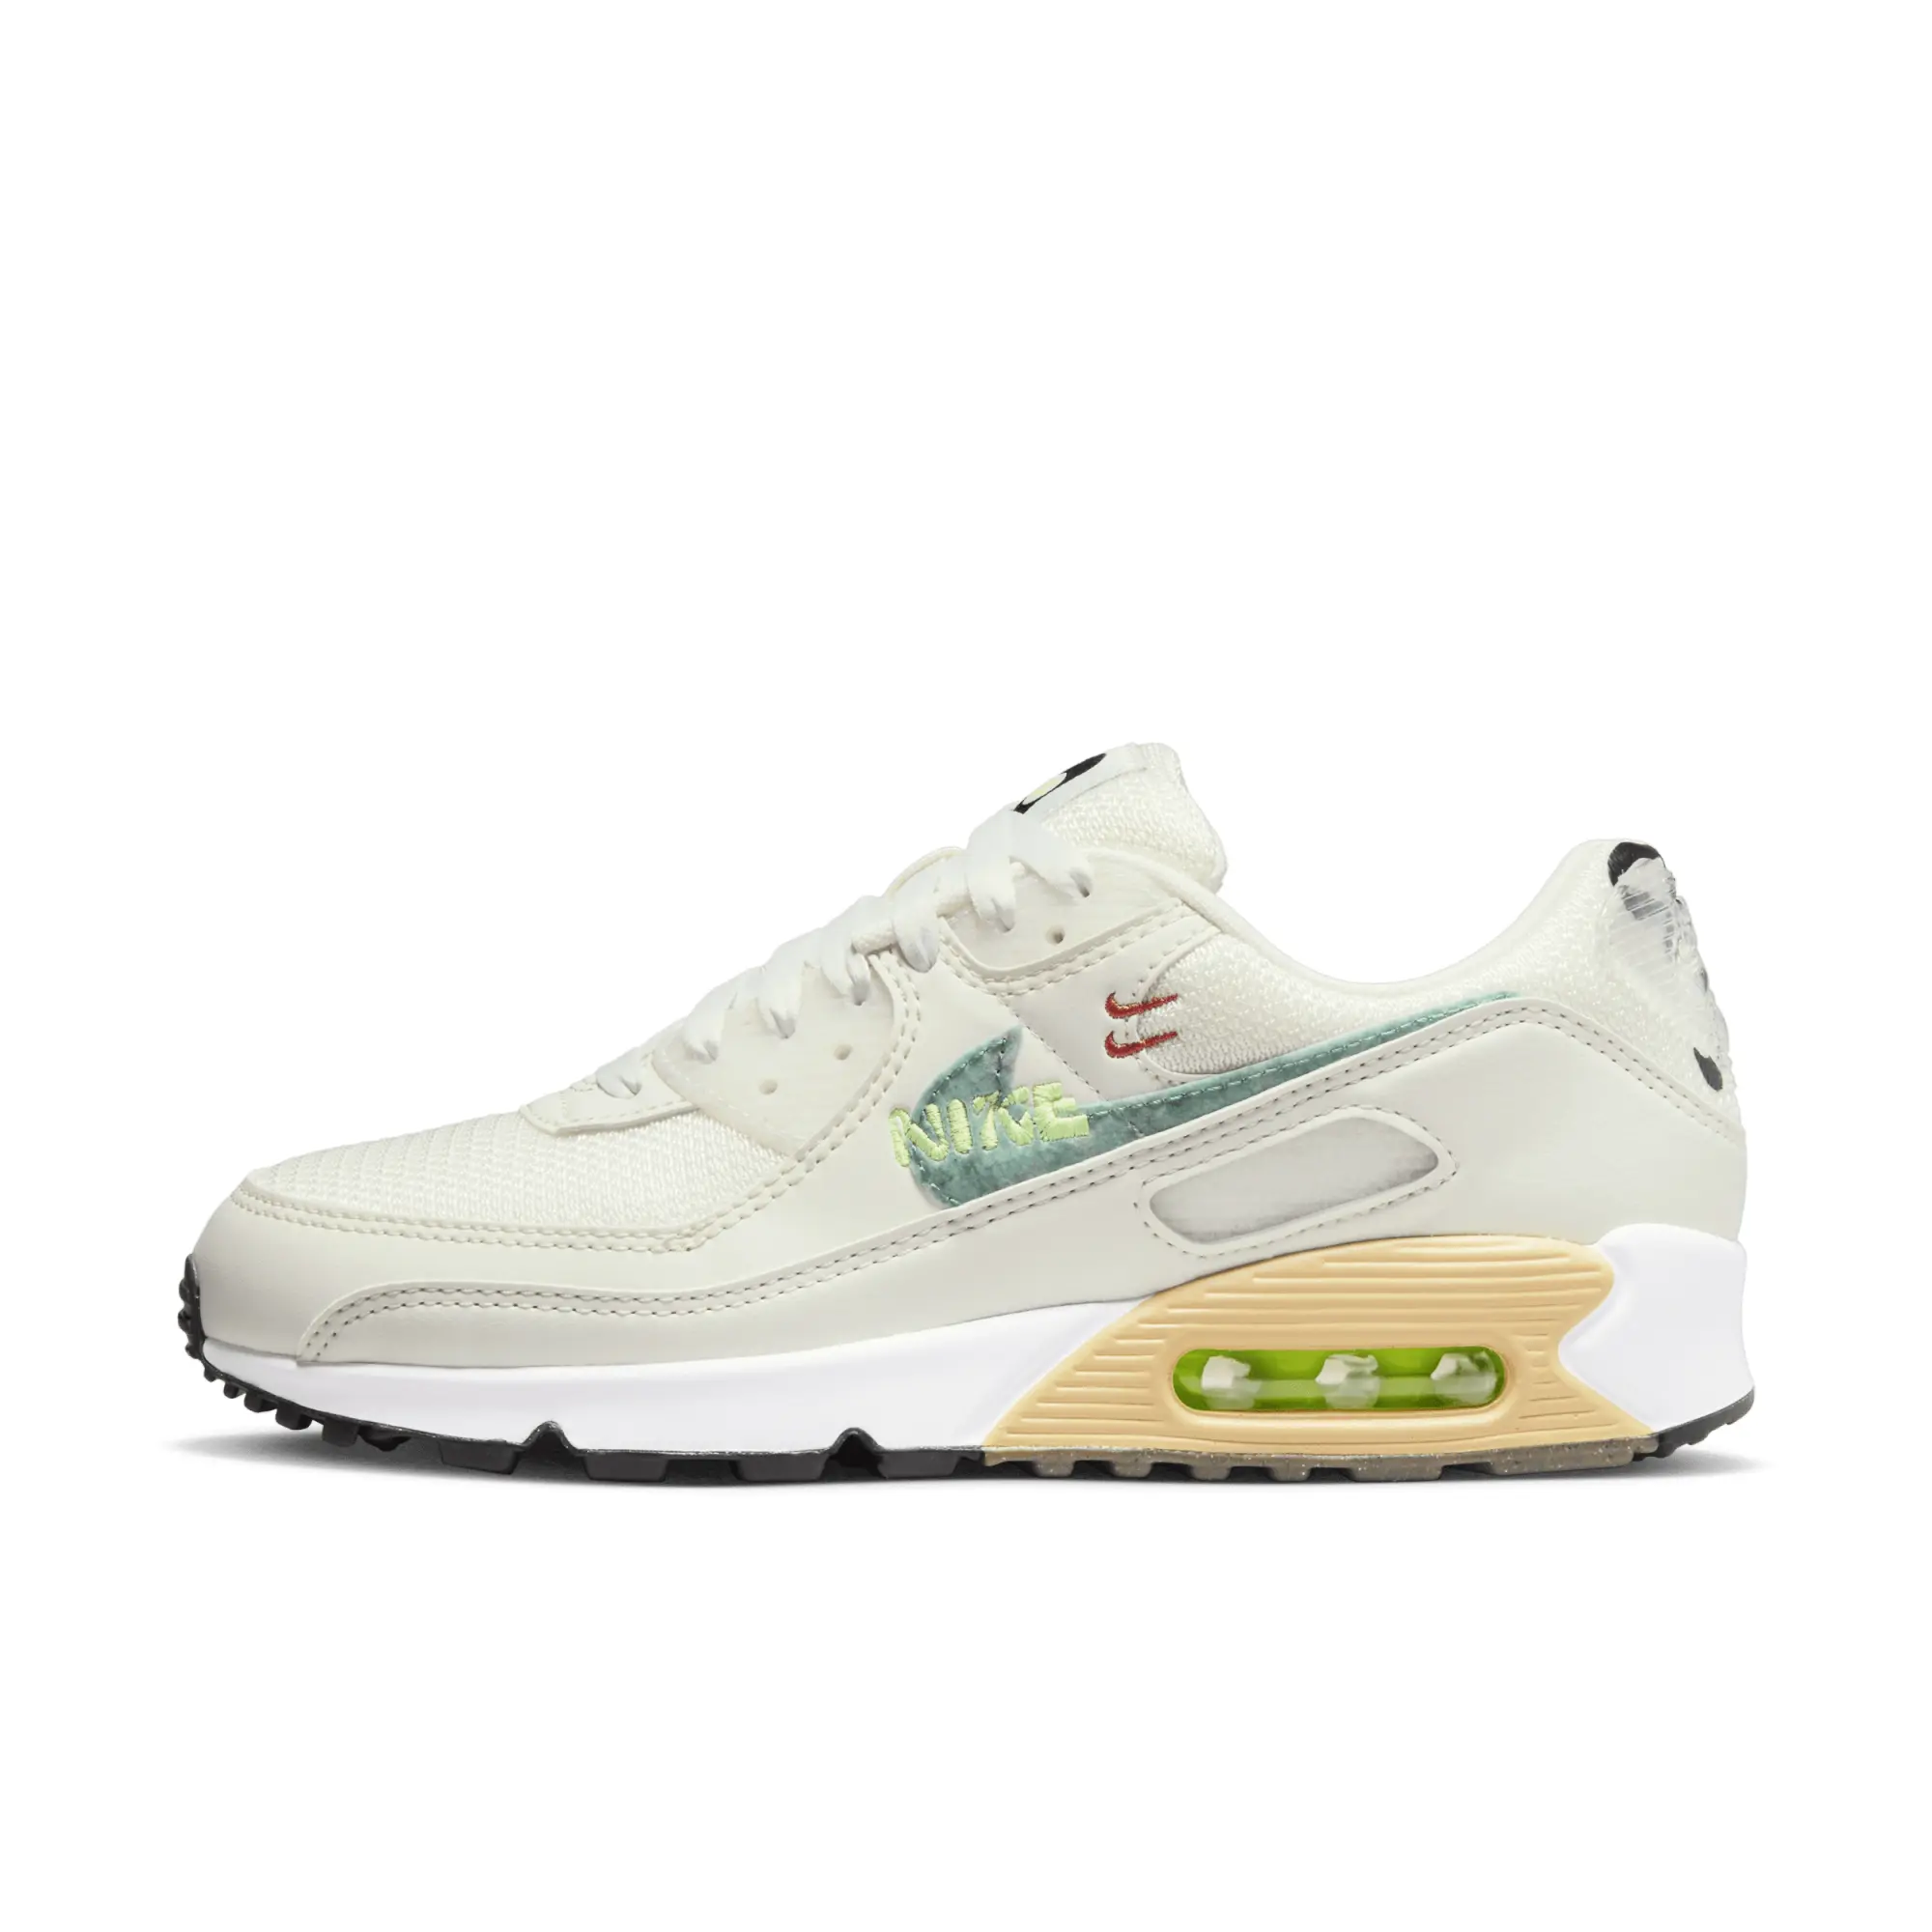 Nike Air Max 90 Se Trainers In Summit White And Neptune Green